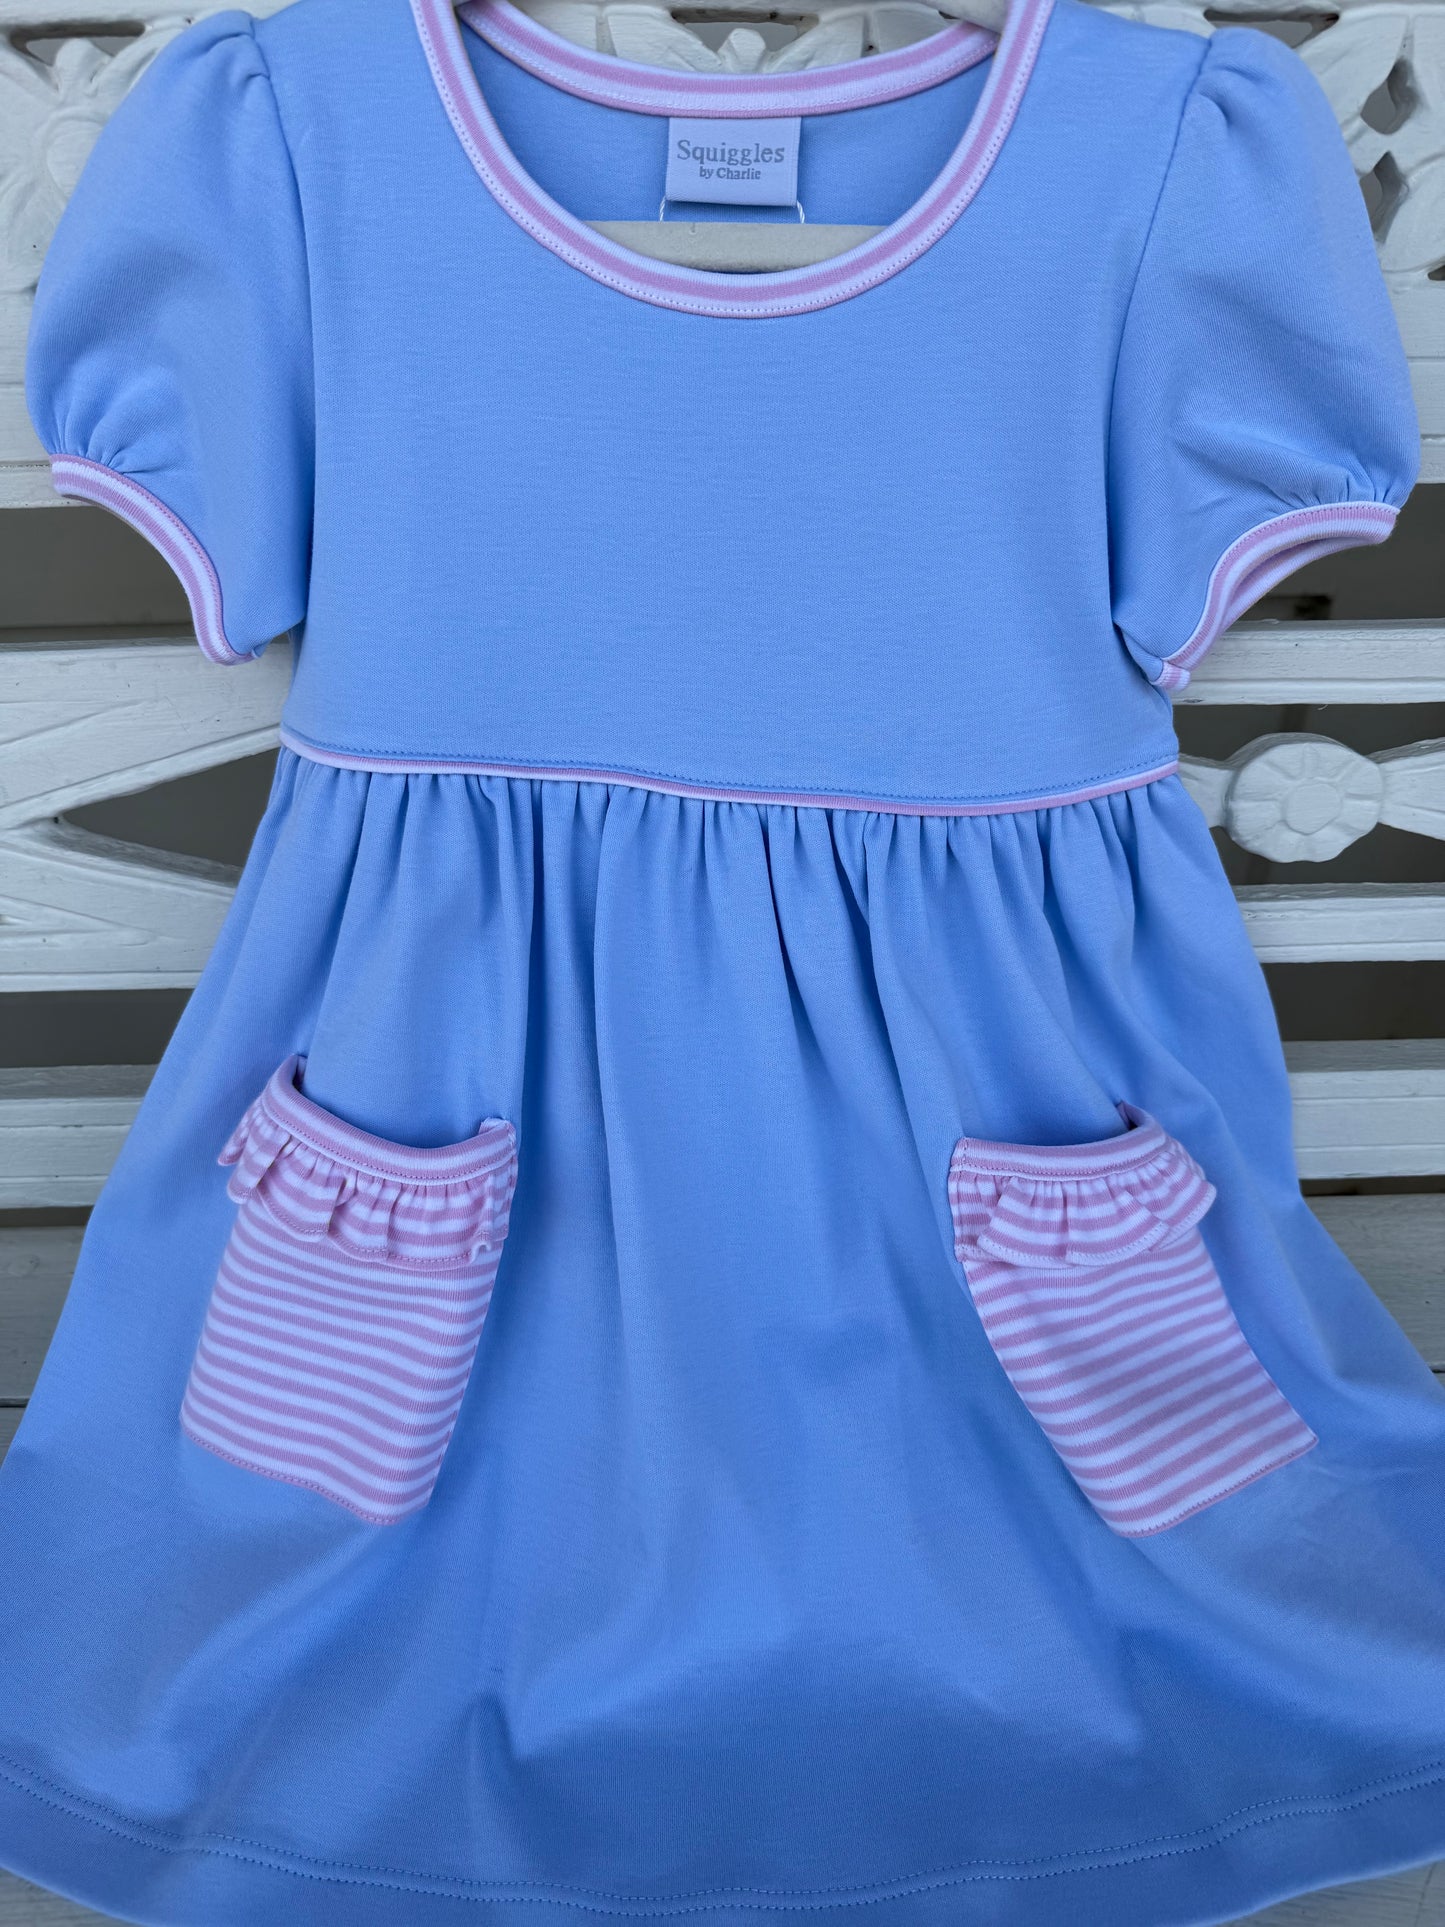 Squiggles Popover Dress with Pockets